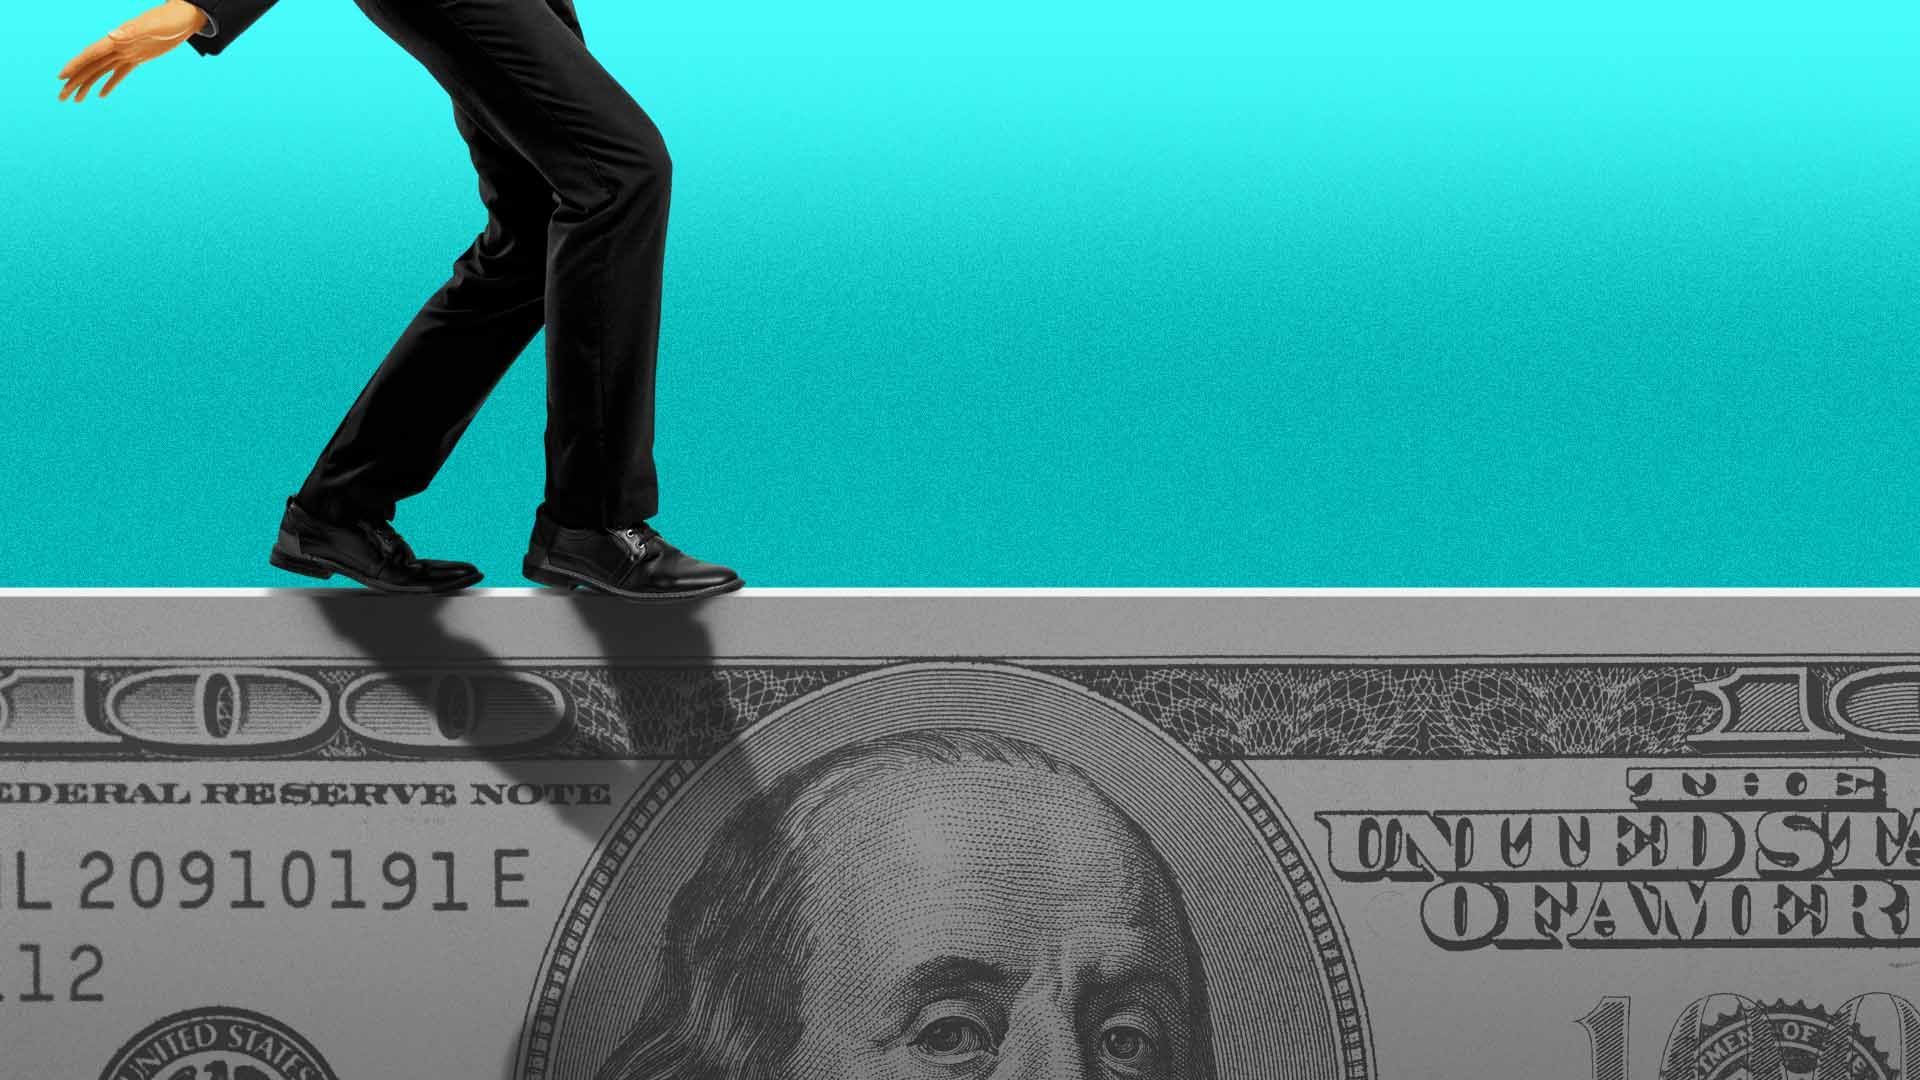 Illustration of a man balancing on the edge of a hundred dollar bill